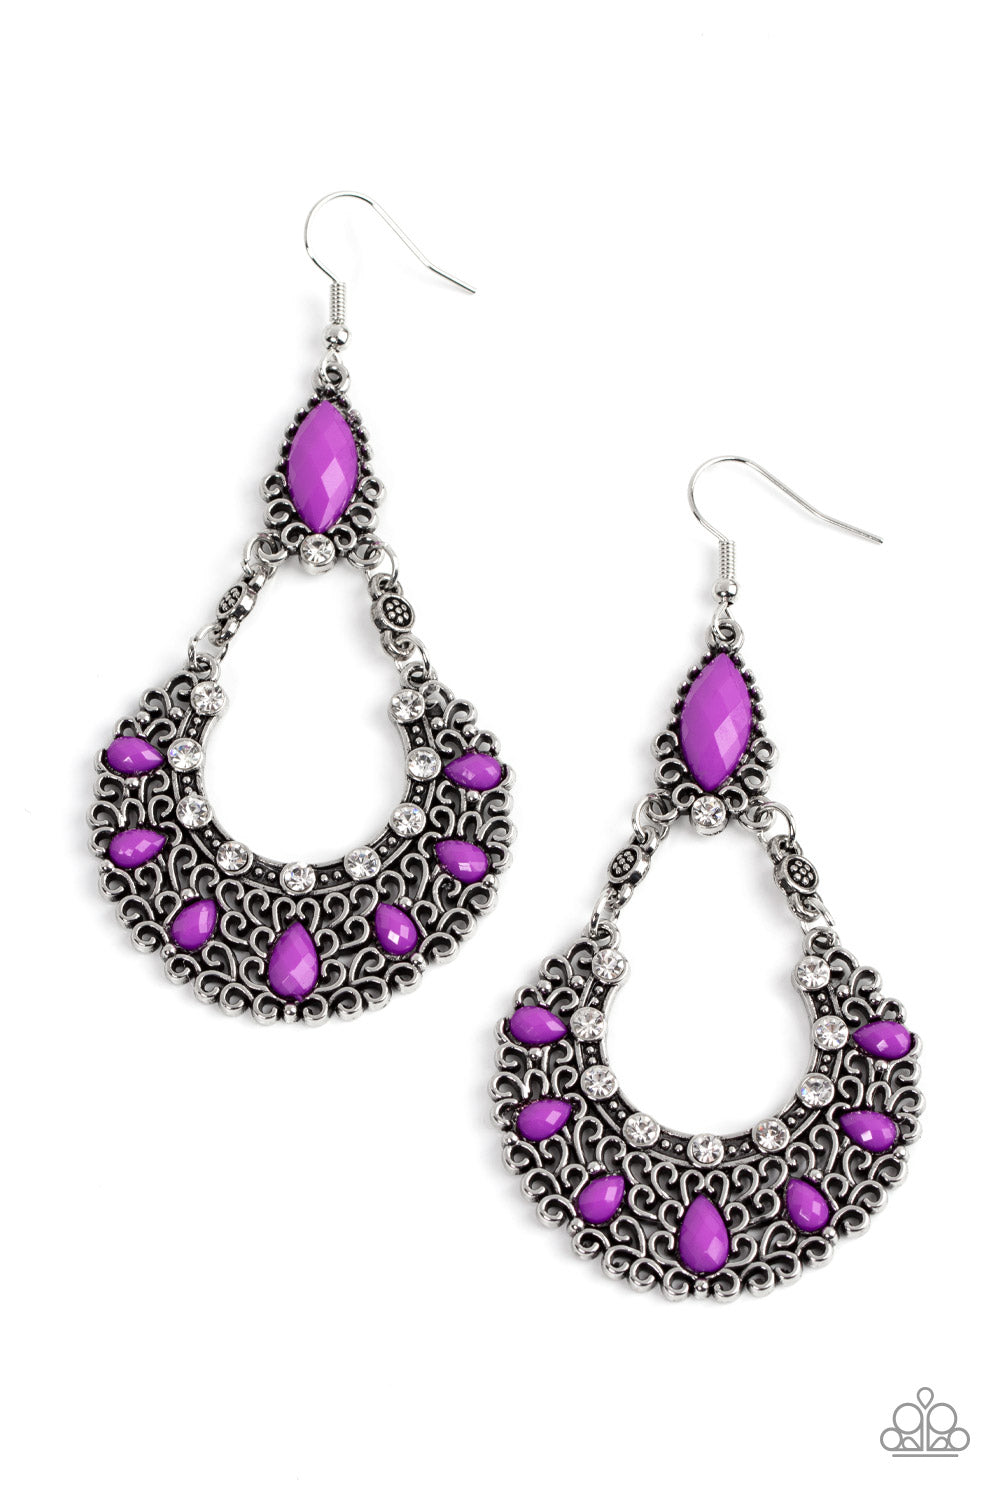 Fluent in Florals - Purple and Silver Fashion Earrings - Paparazzi Accessories - Purple beads and dainty white rhinestones, a filigree filled silver wreath swings from the bottom of a matching purple bead for a whimsical fashion. Earring attaches to a standard fishhook fitting.